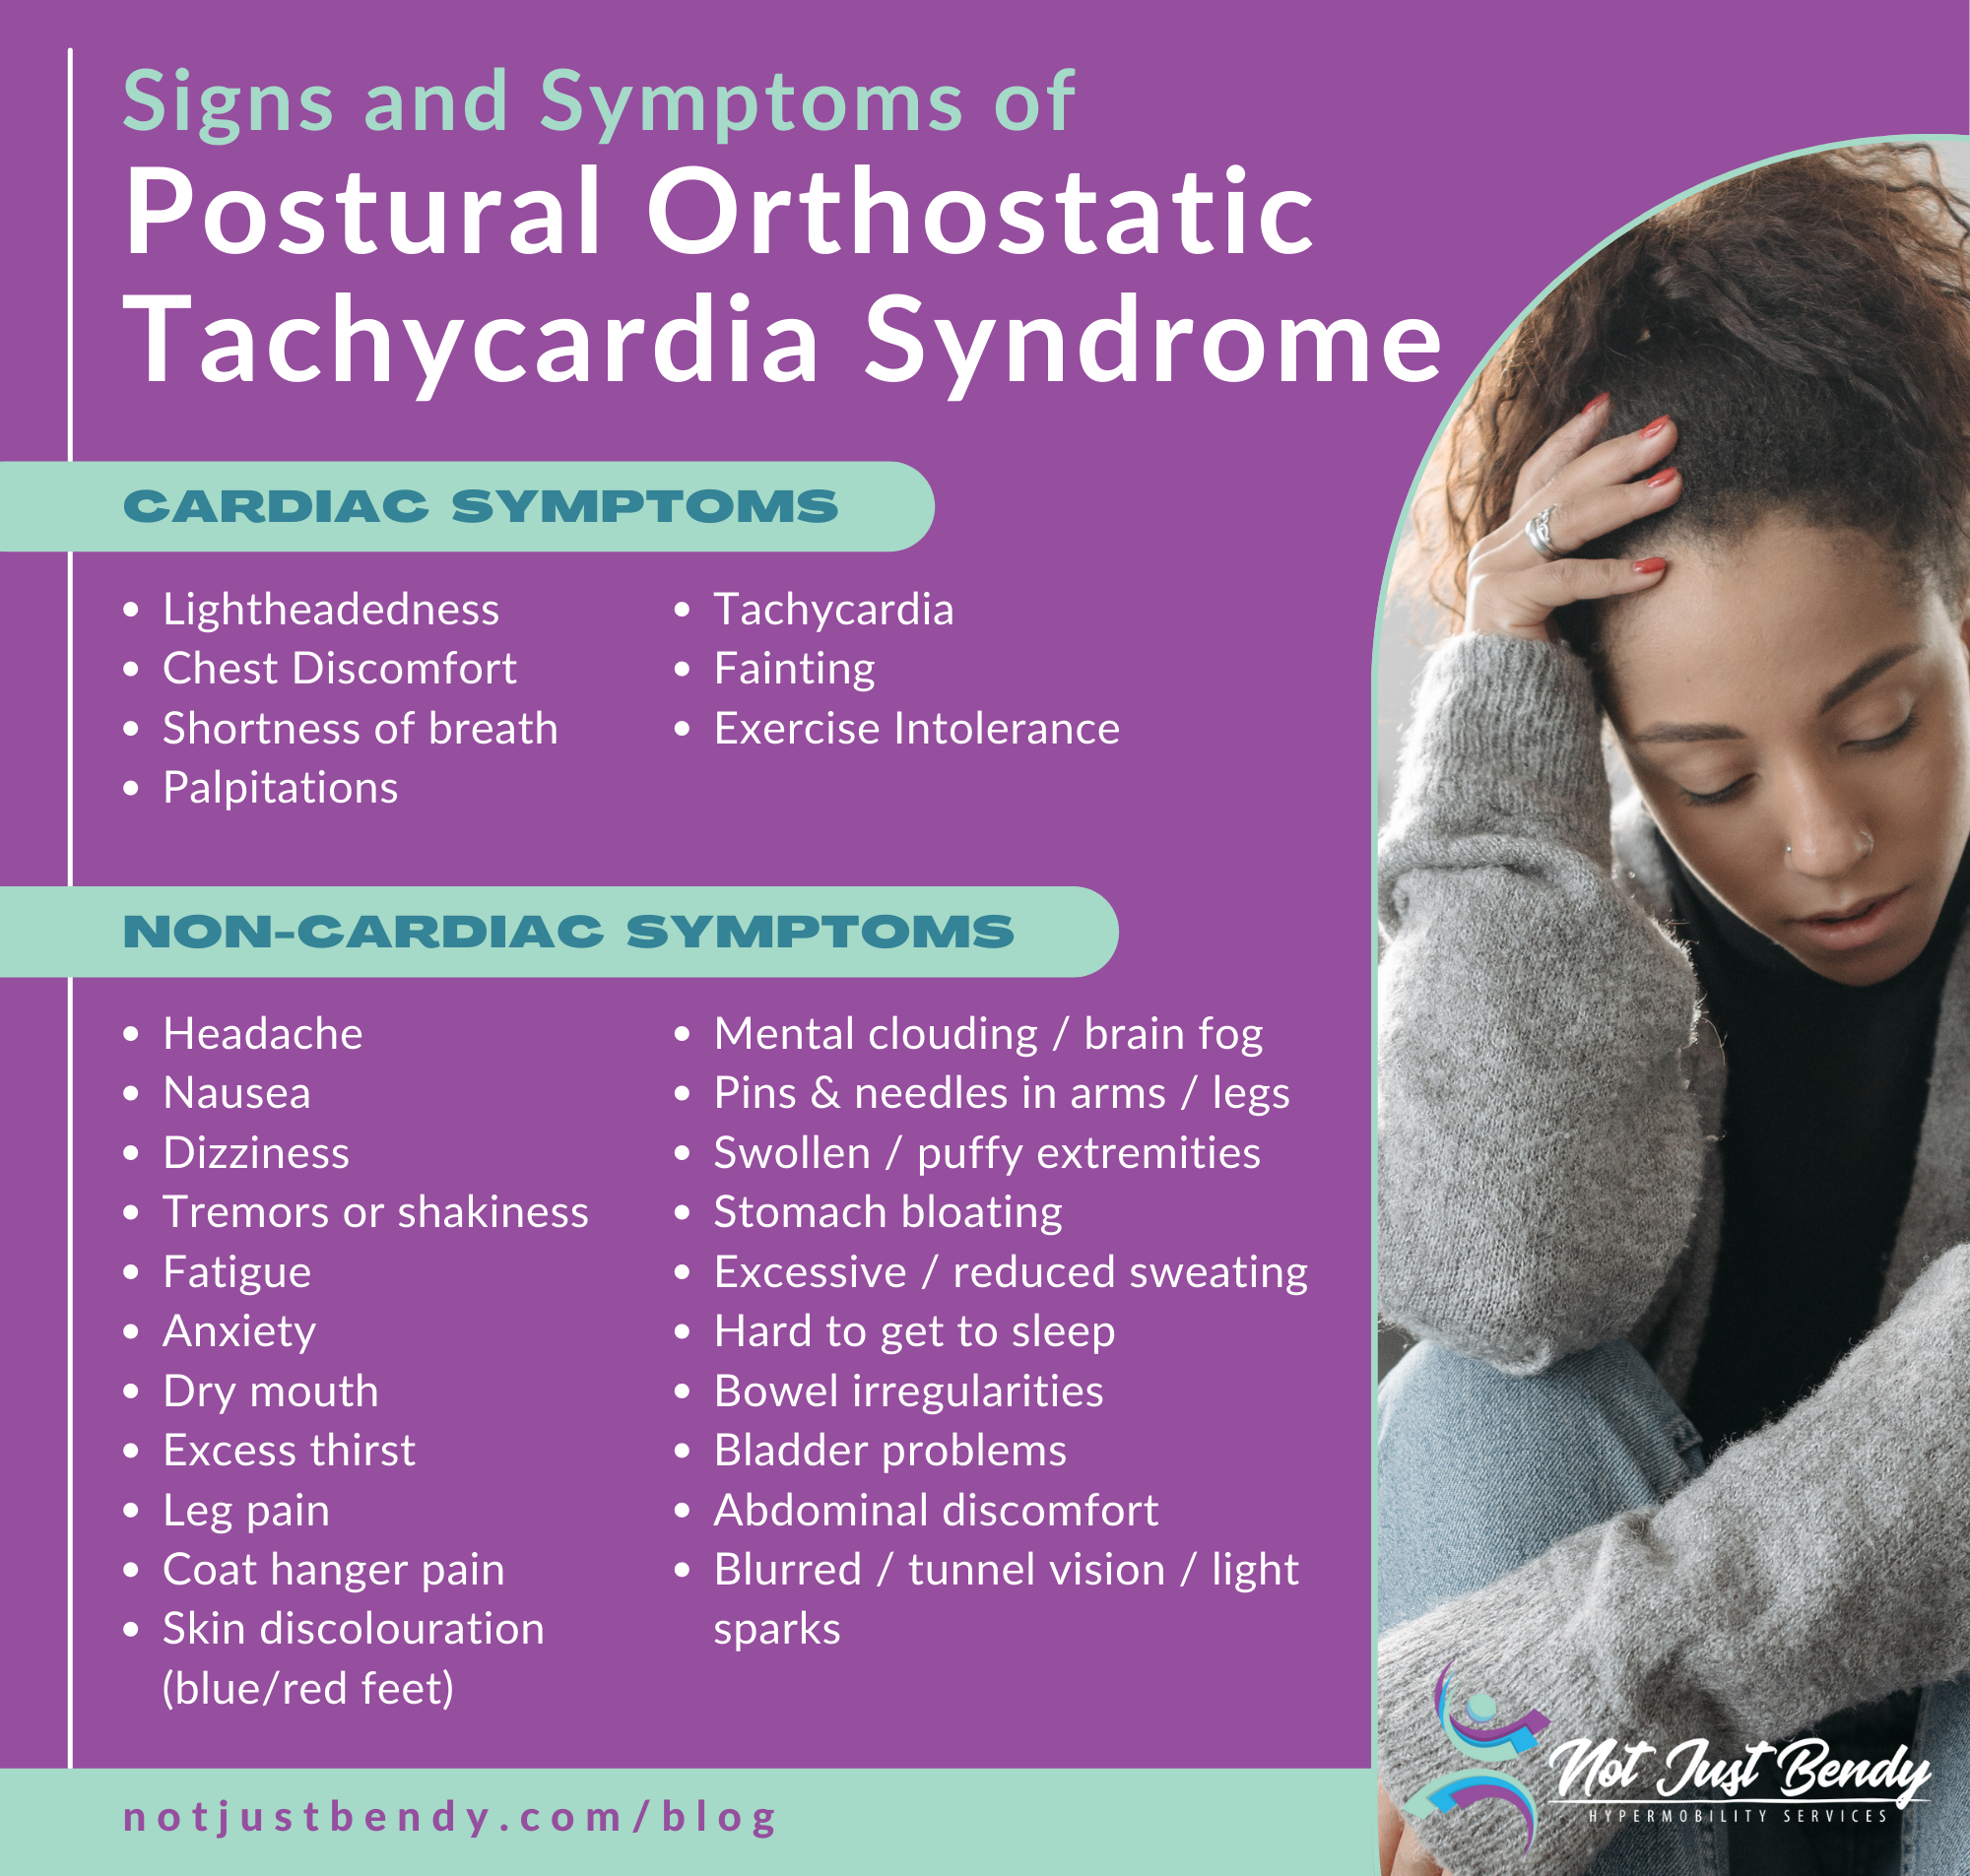 Today is Postural Orthostatic Tachycardia Syndrome (POTS) awareness day!  Here is some brief information about this condition. What other